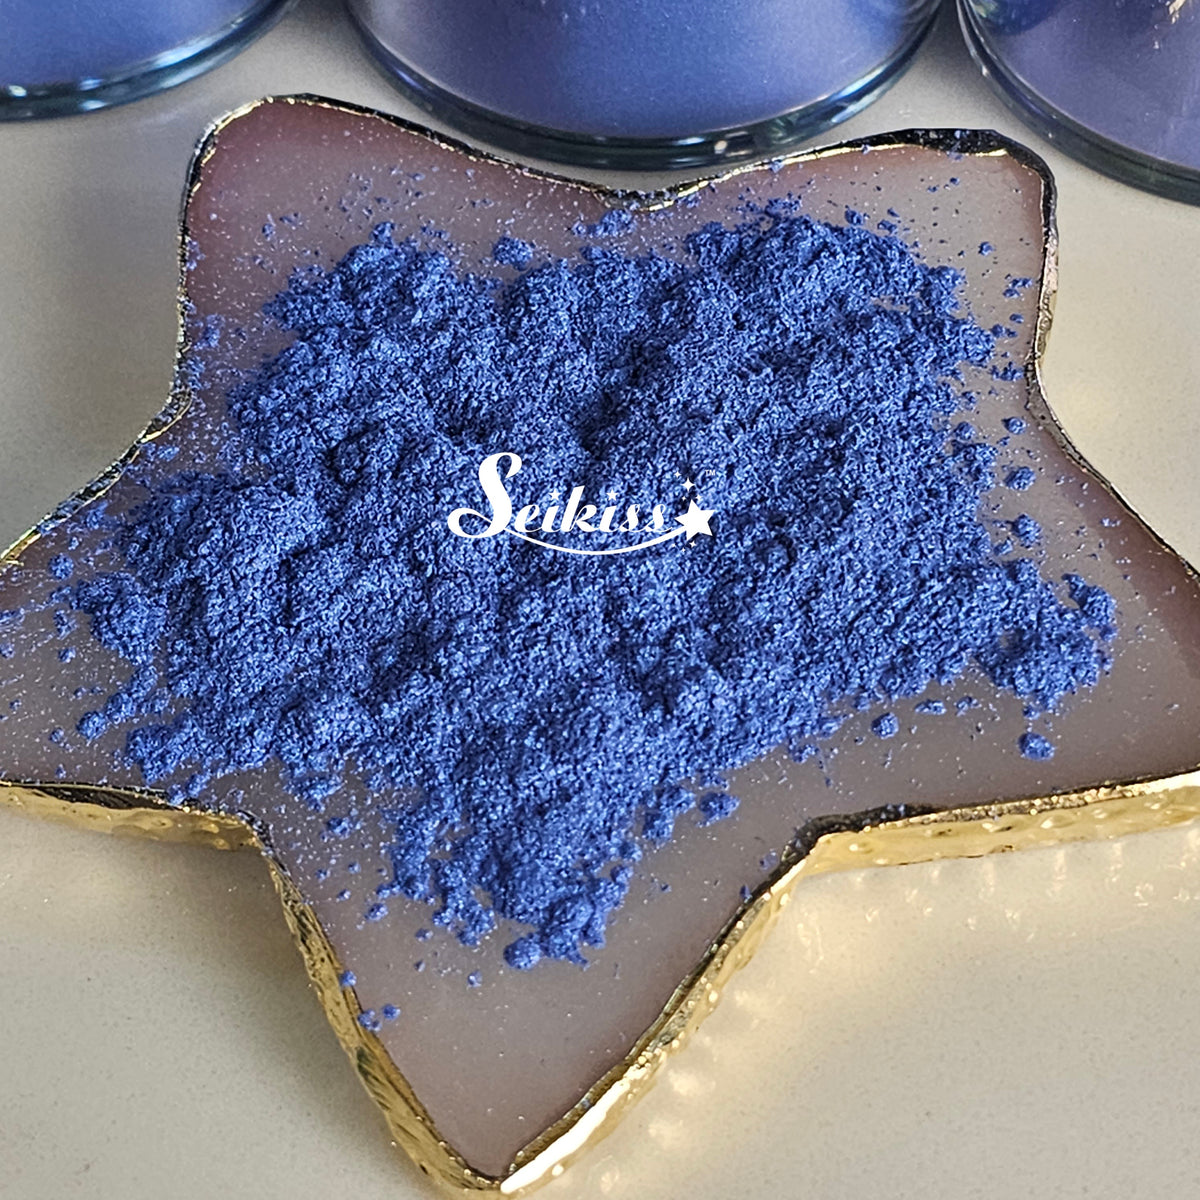 London Blue Mica Powder for Resin, Alcohol Ink, Epoxy, Wax Melts - Blue Mica